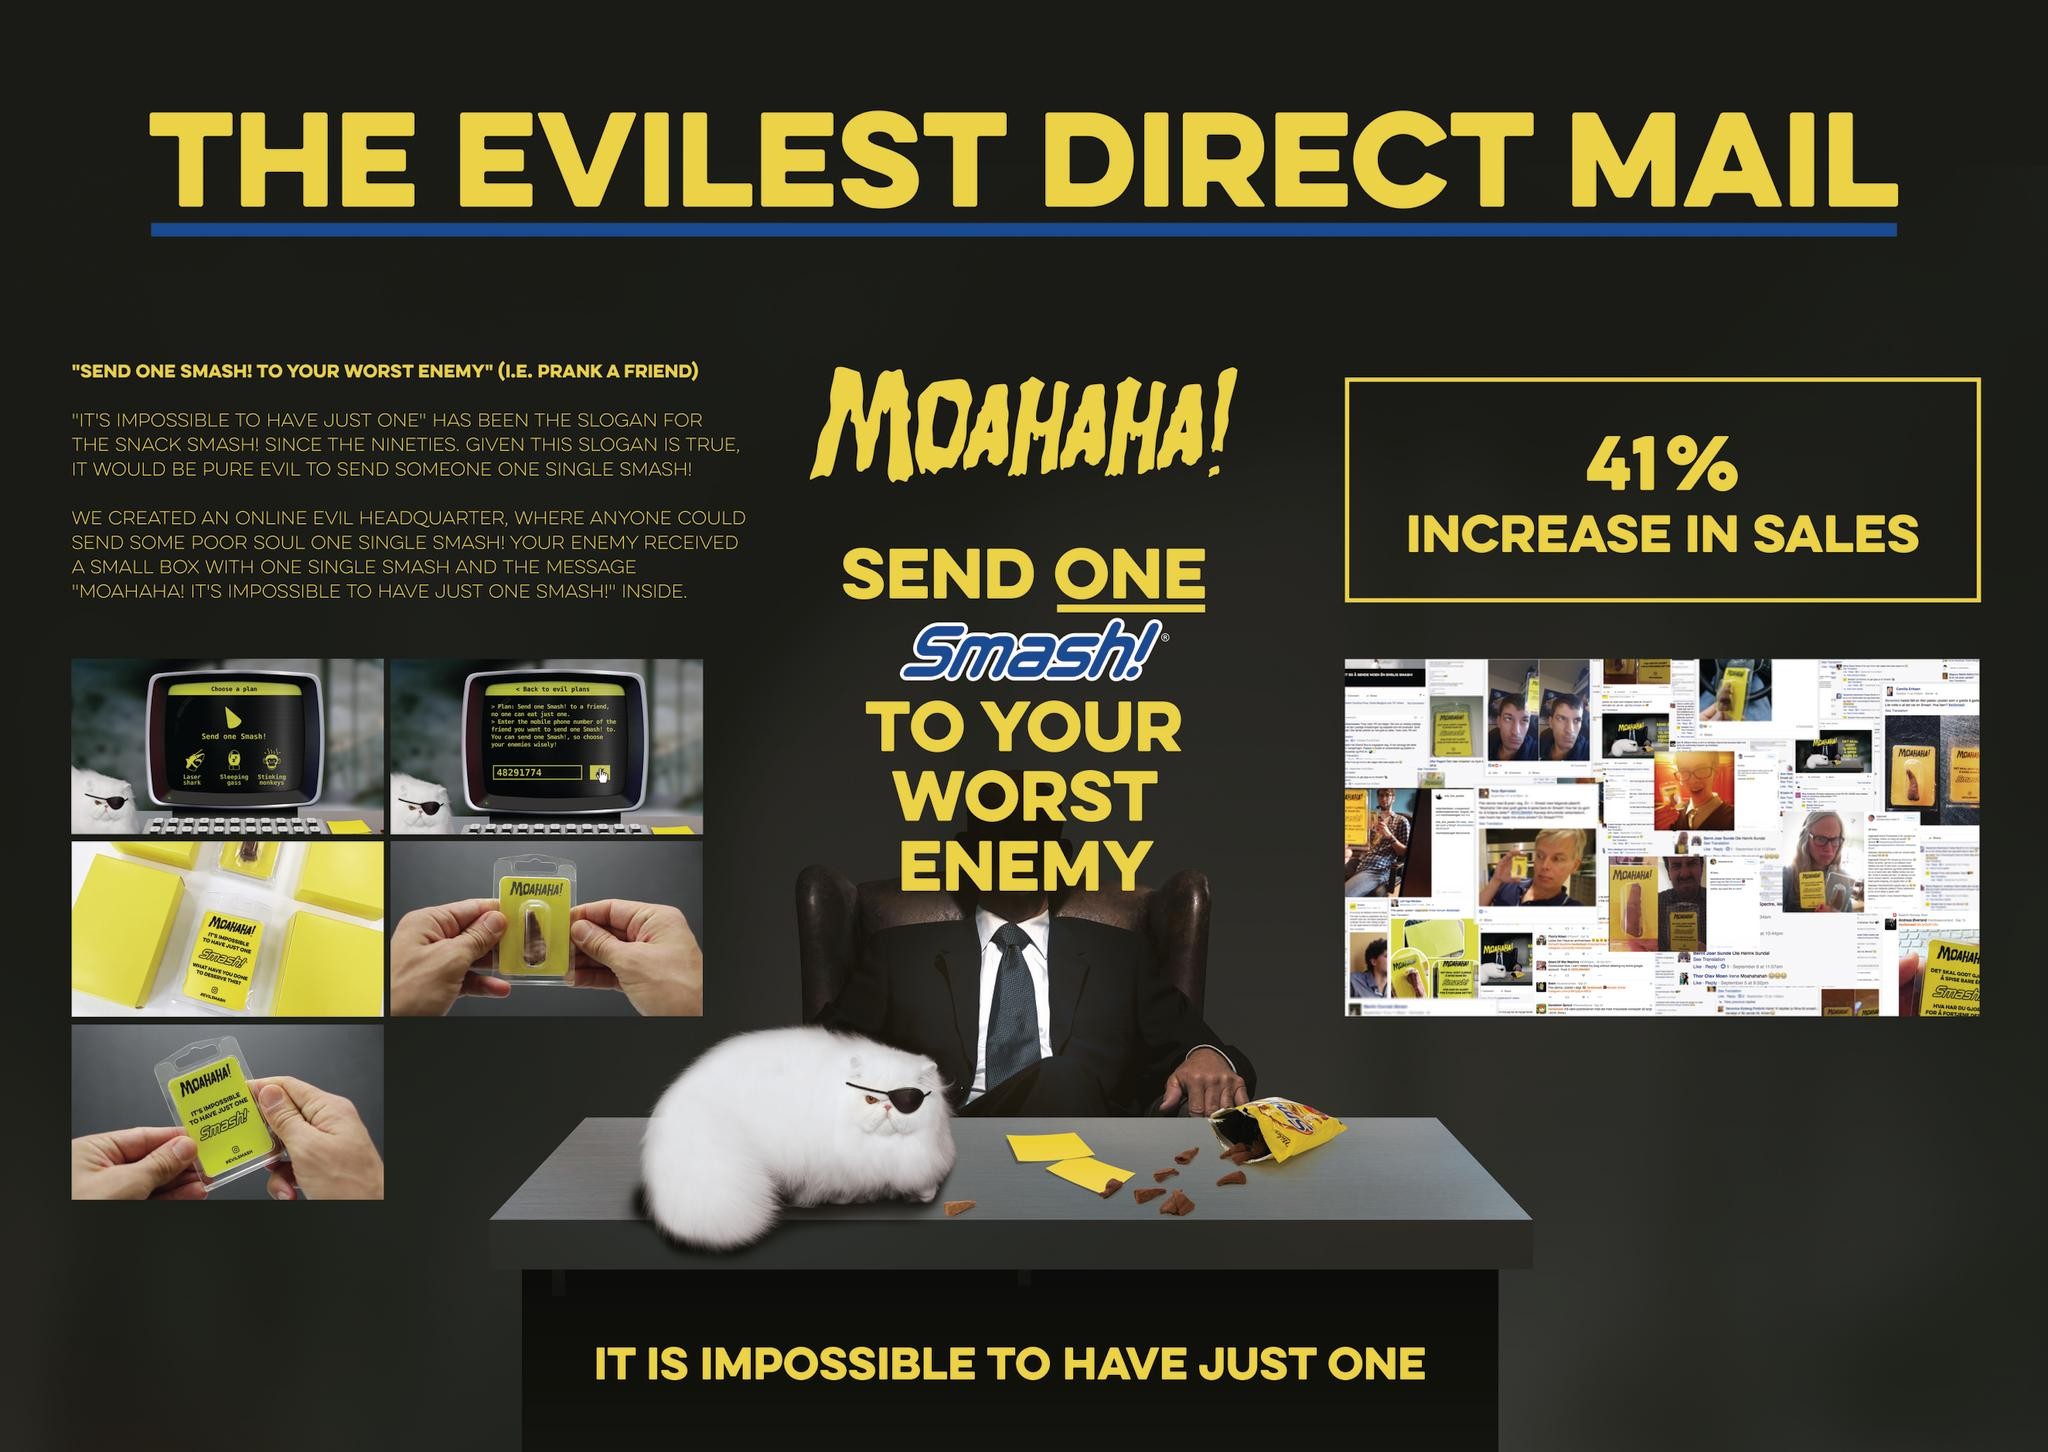 The evilest direct mail